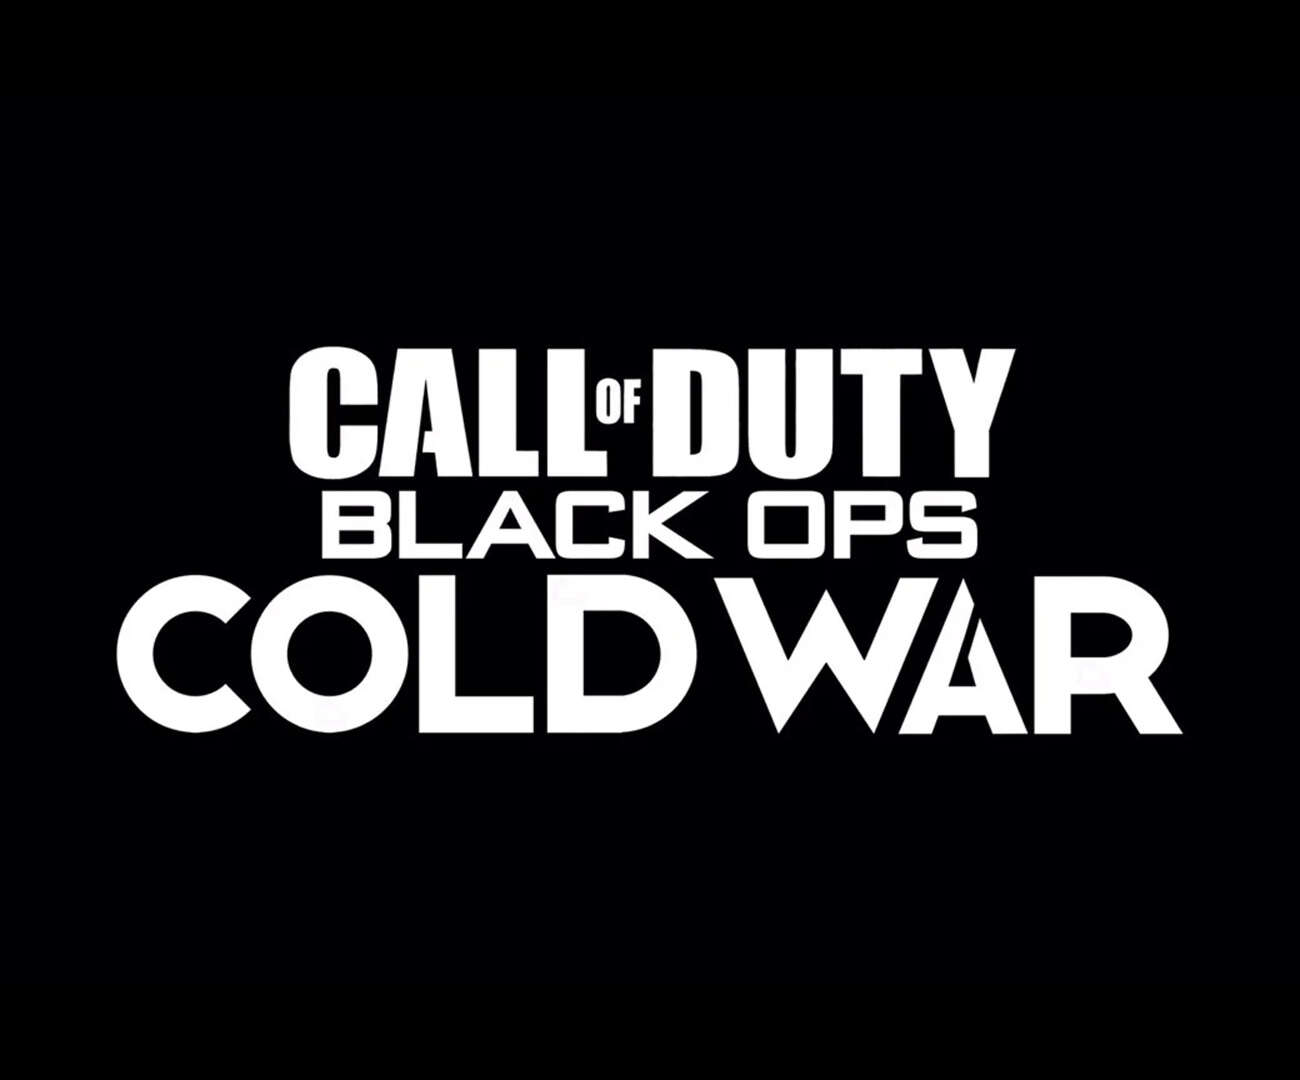 call of duty cold war, black ops